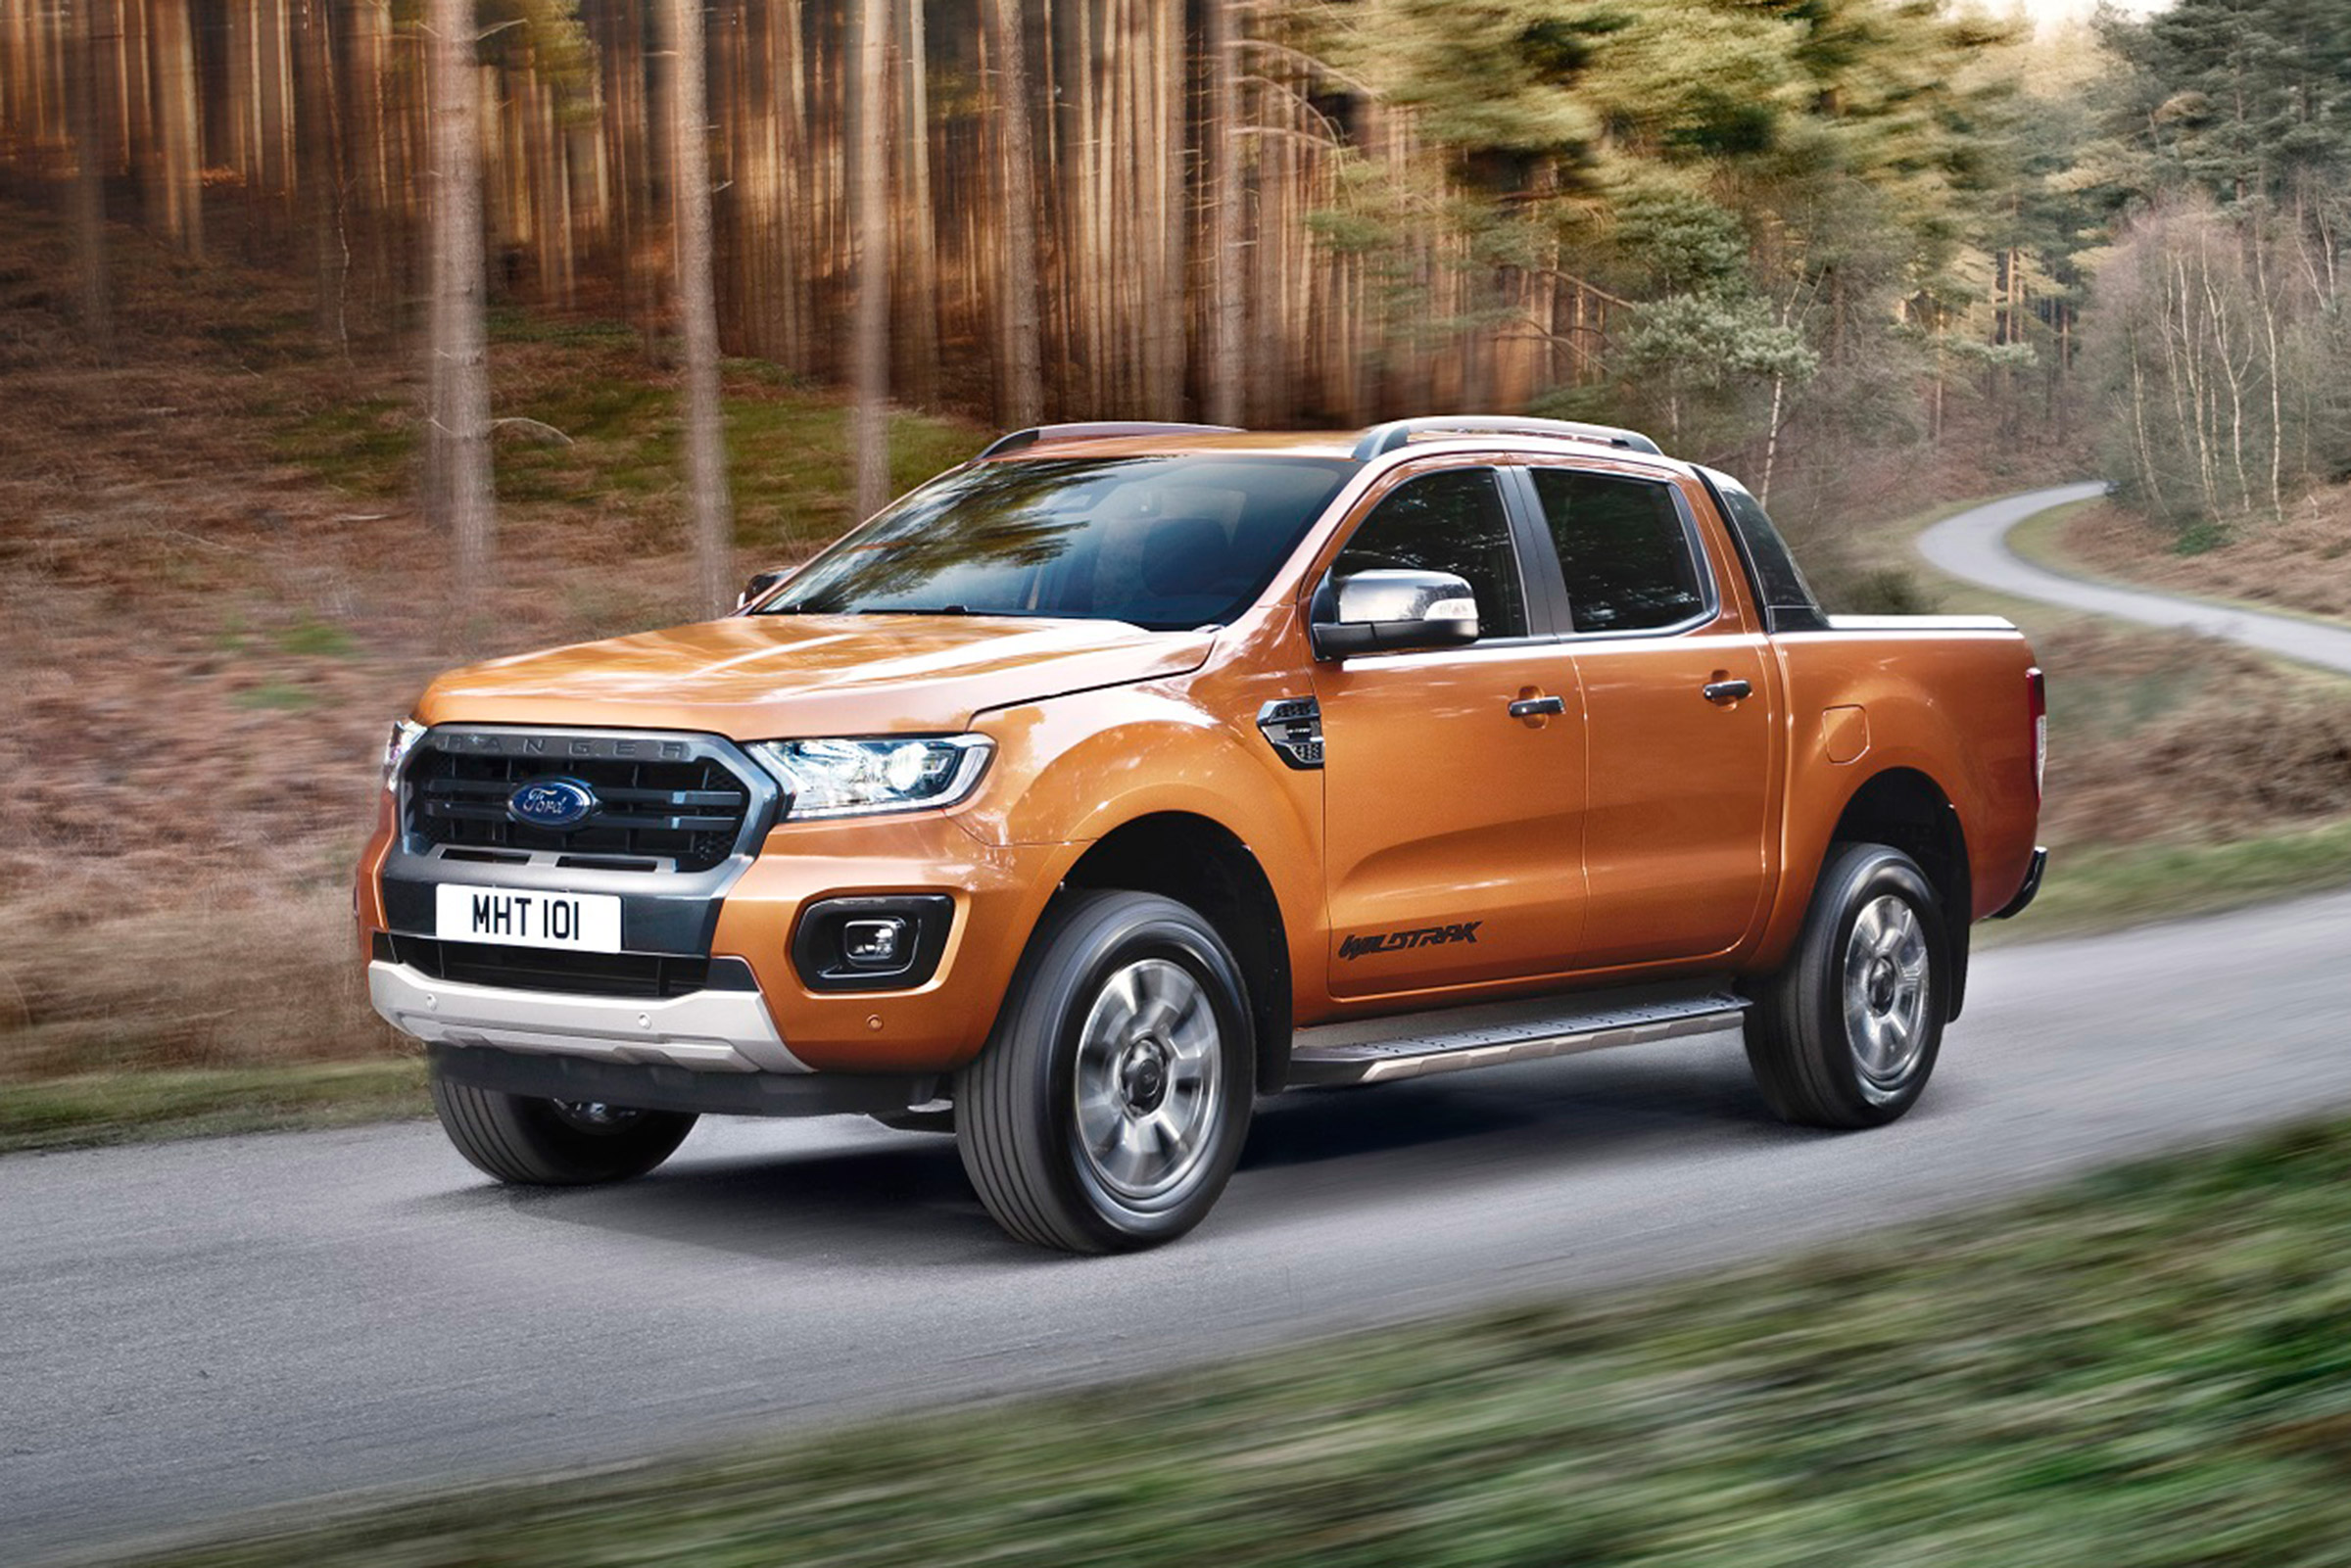 New 2019 Ford Ranger facelift adds more kit and more power